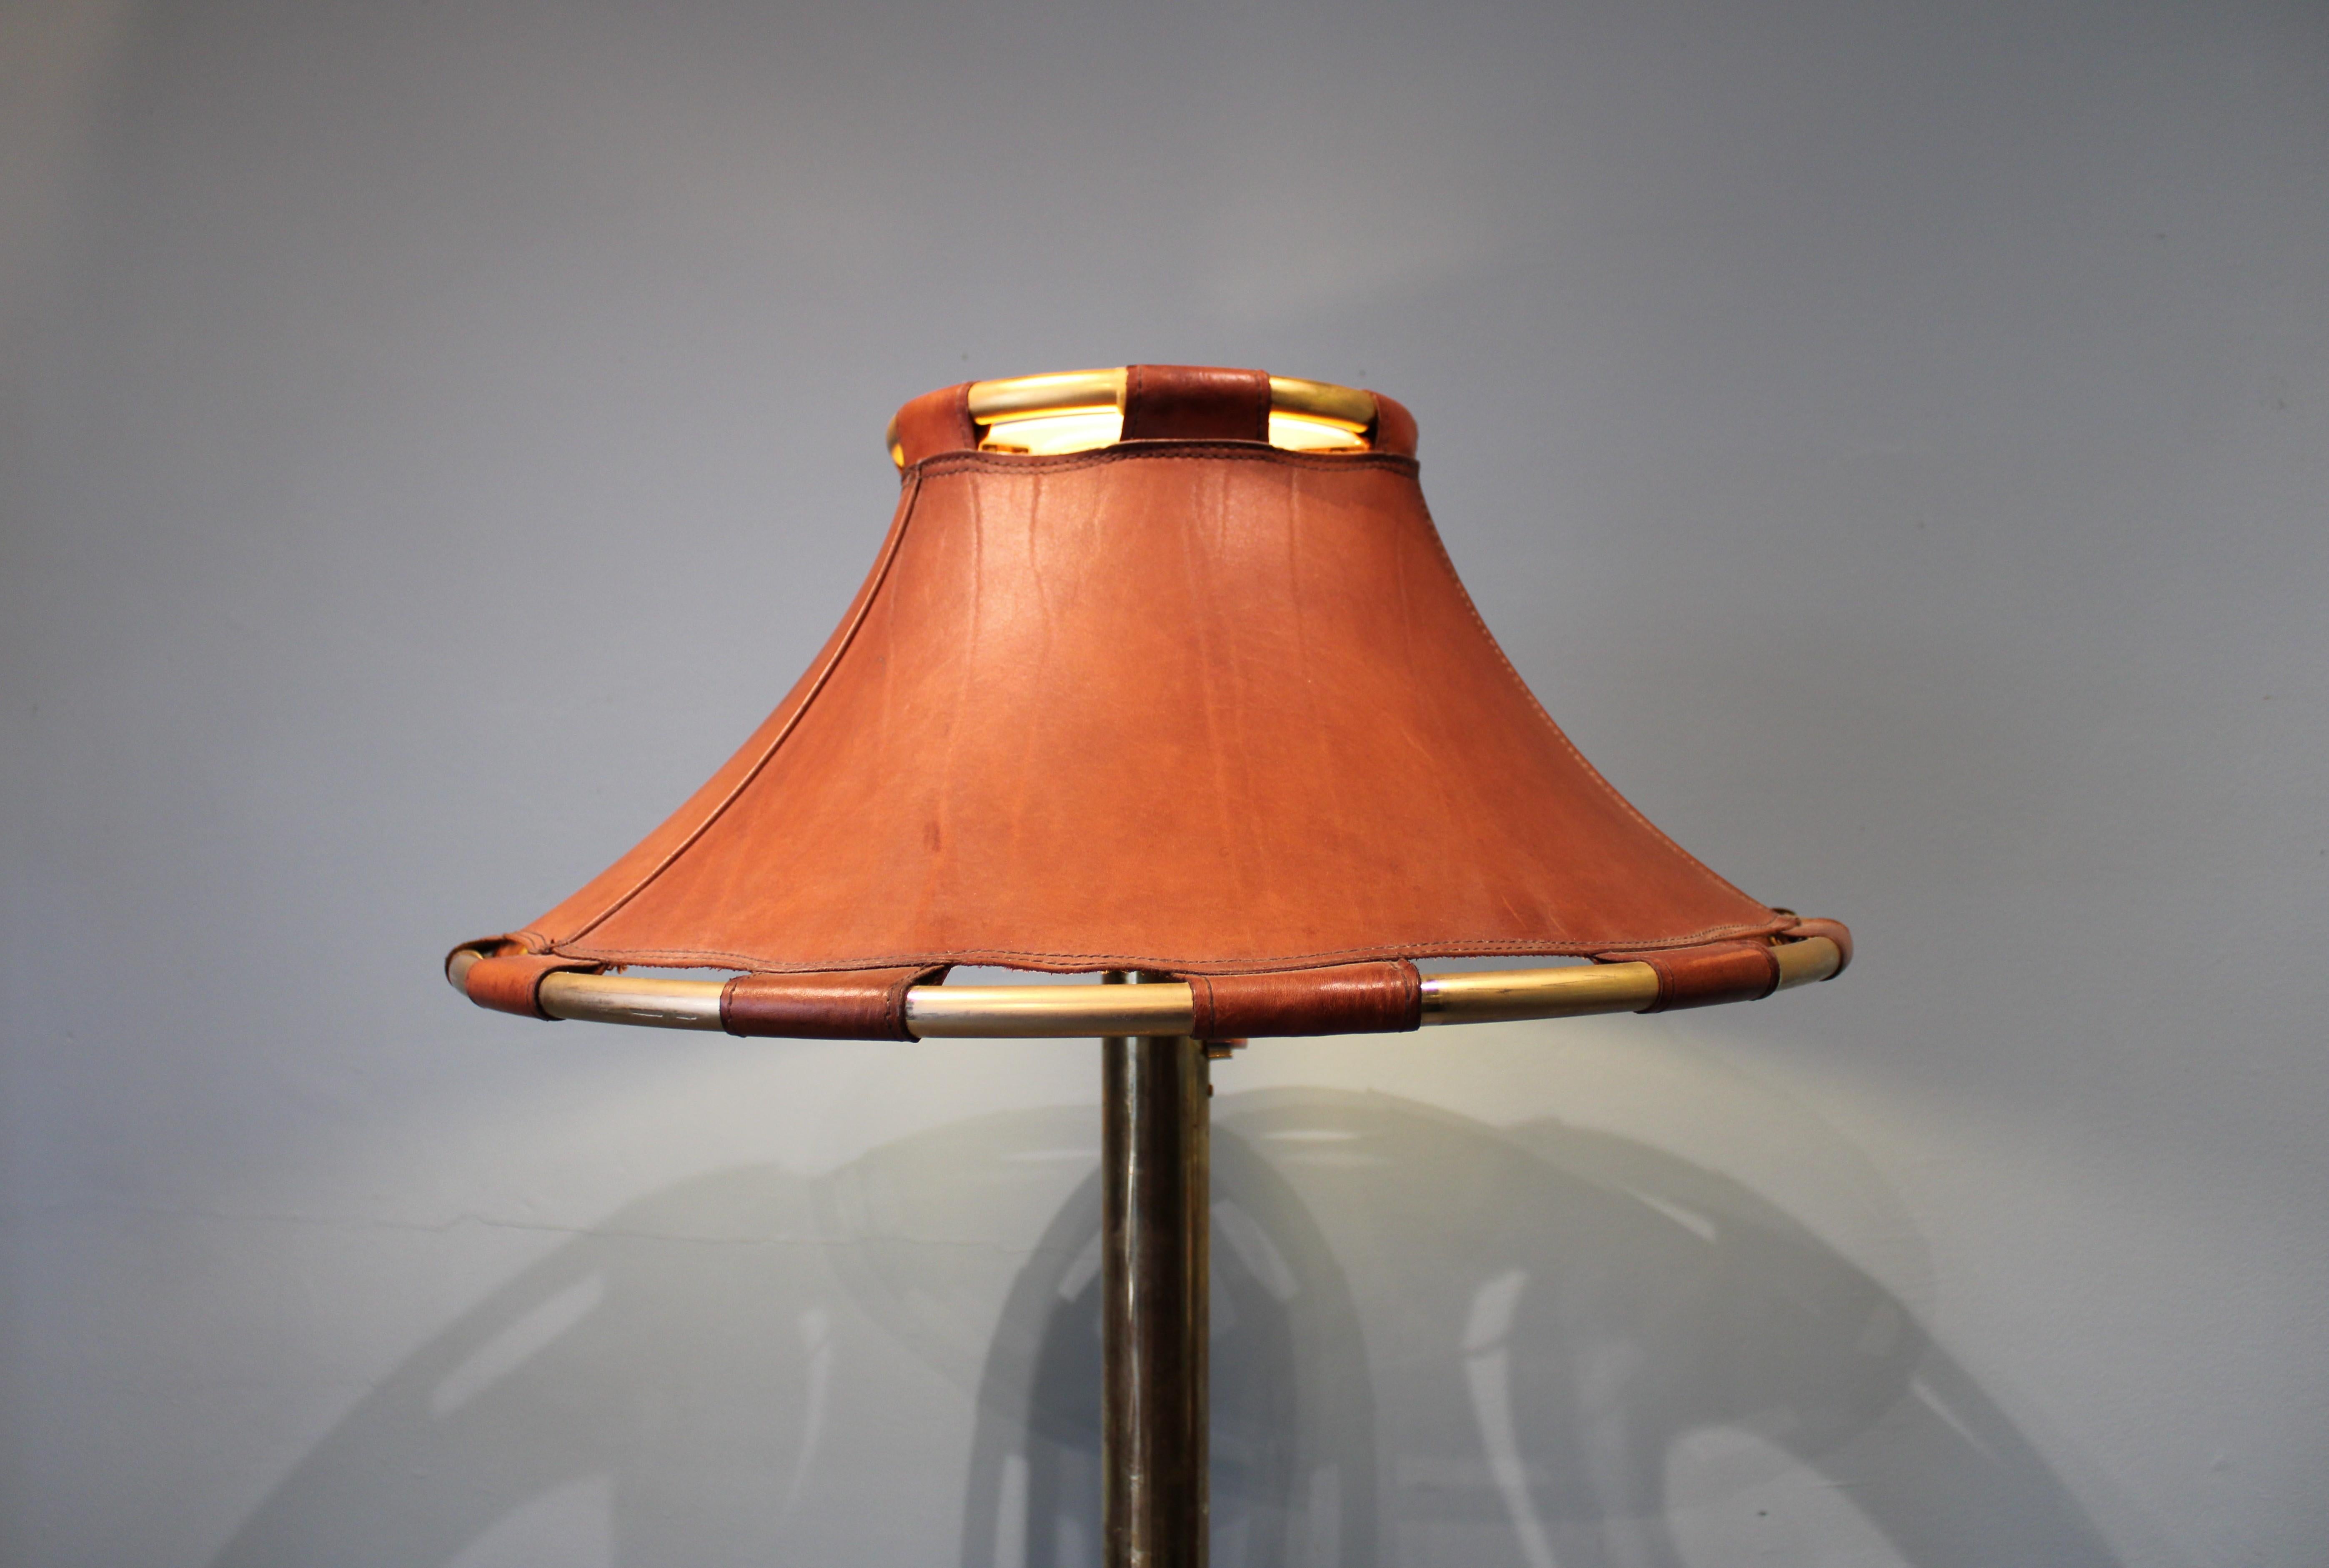 Floor lamp model Anna in leather and brass by Anna Ehrner, for Ateljé Lyktan.
1970s, made in Sweden.